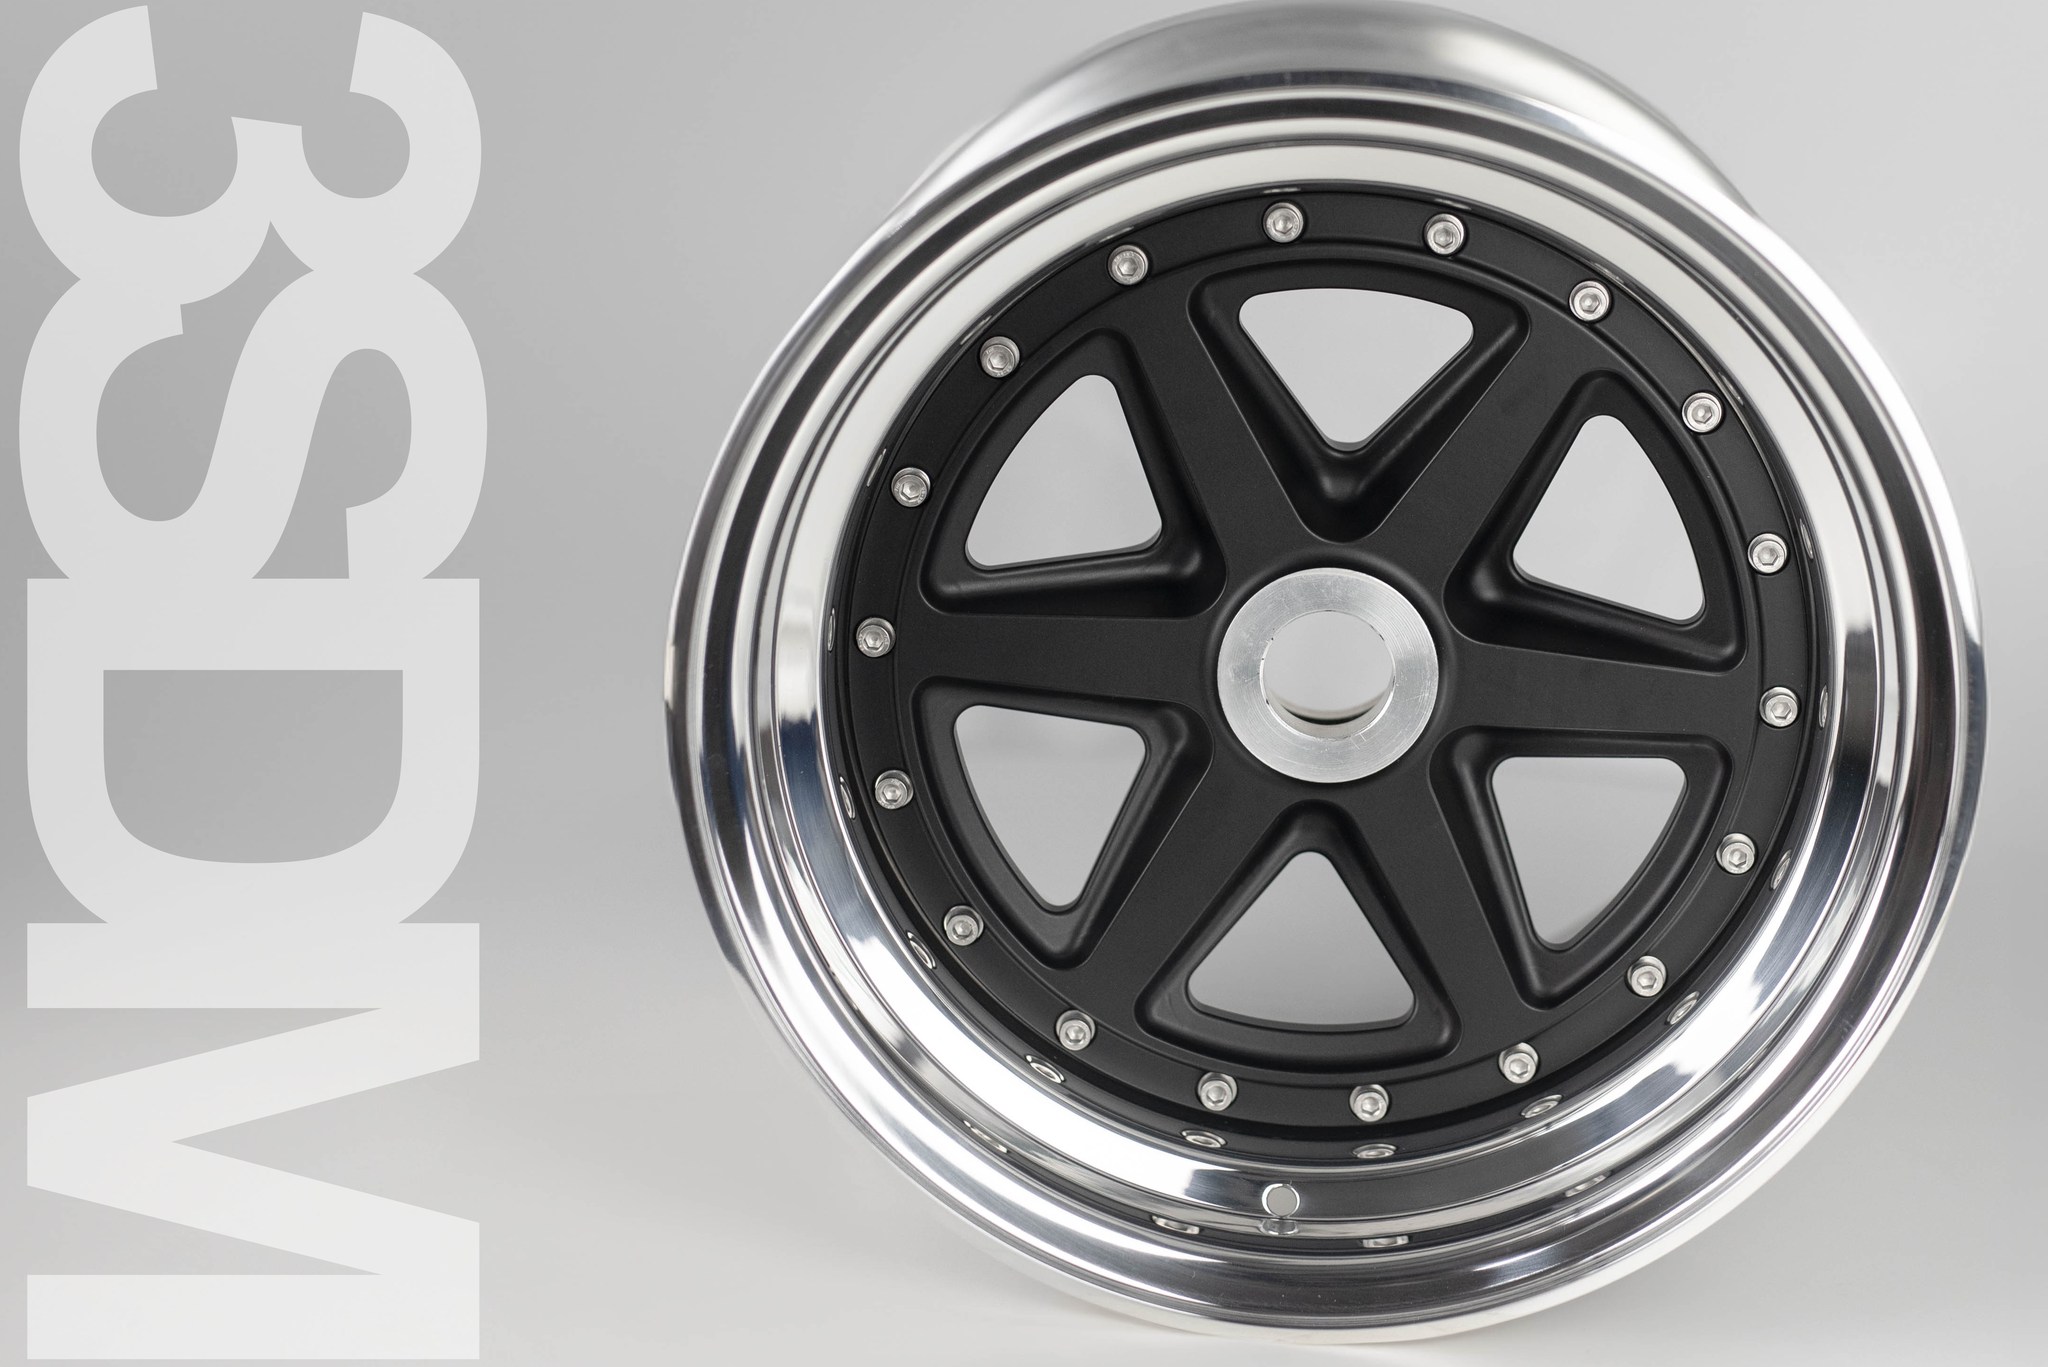 Producing wheels is what we do and these were | C1eRoVfu1nm